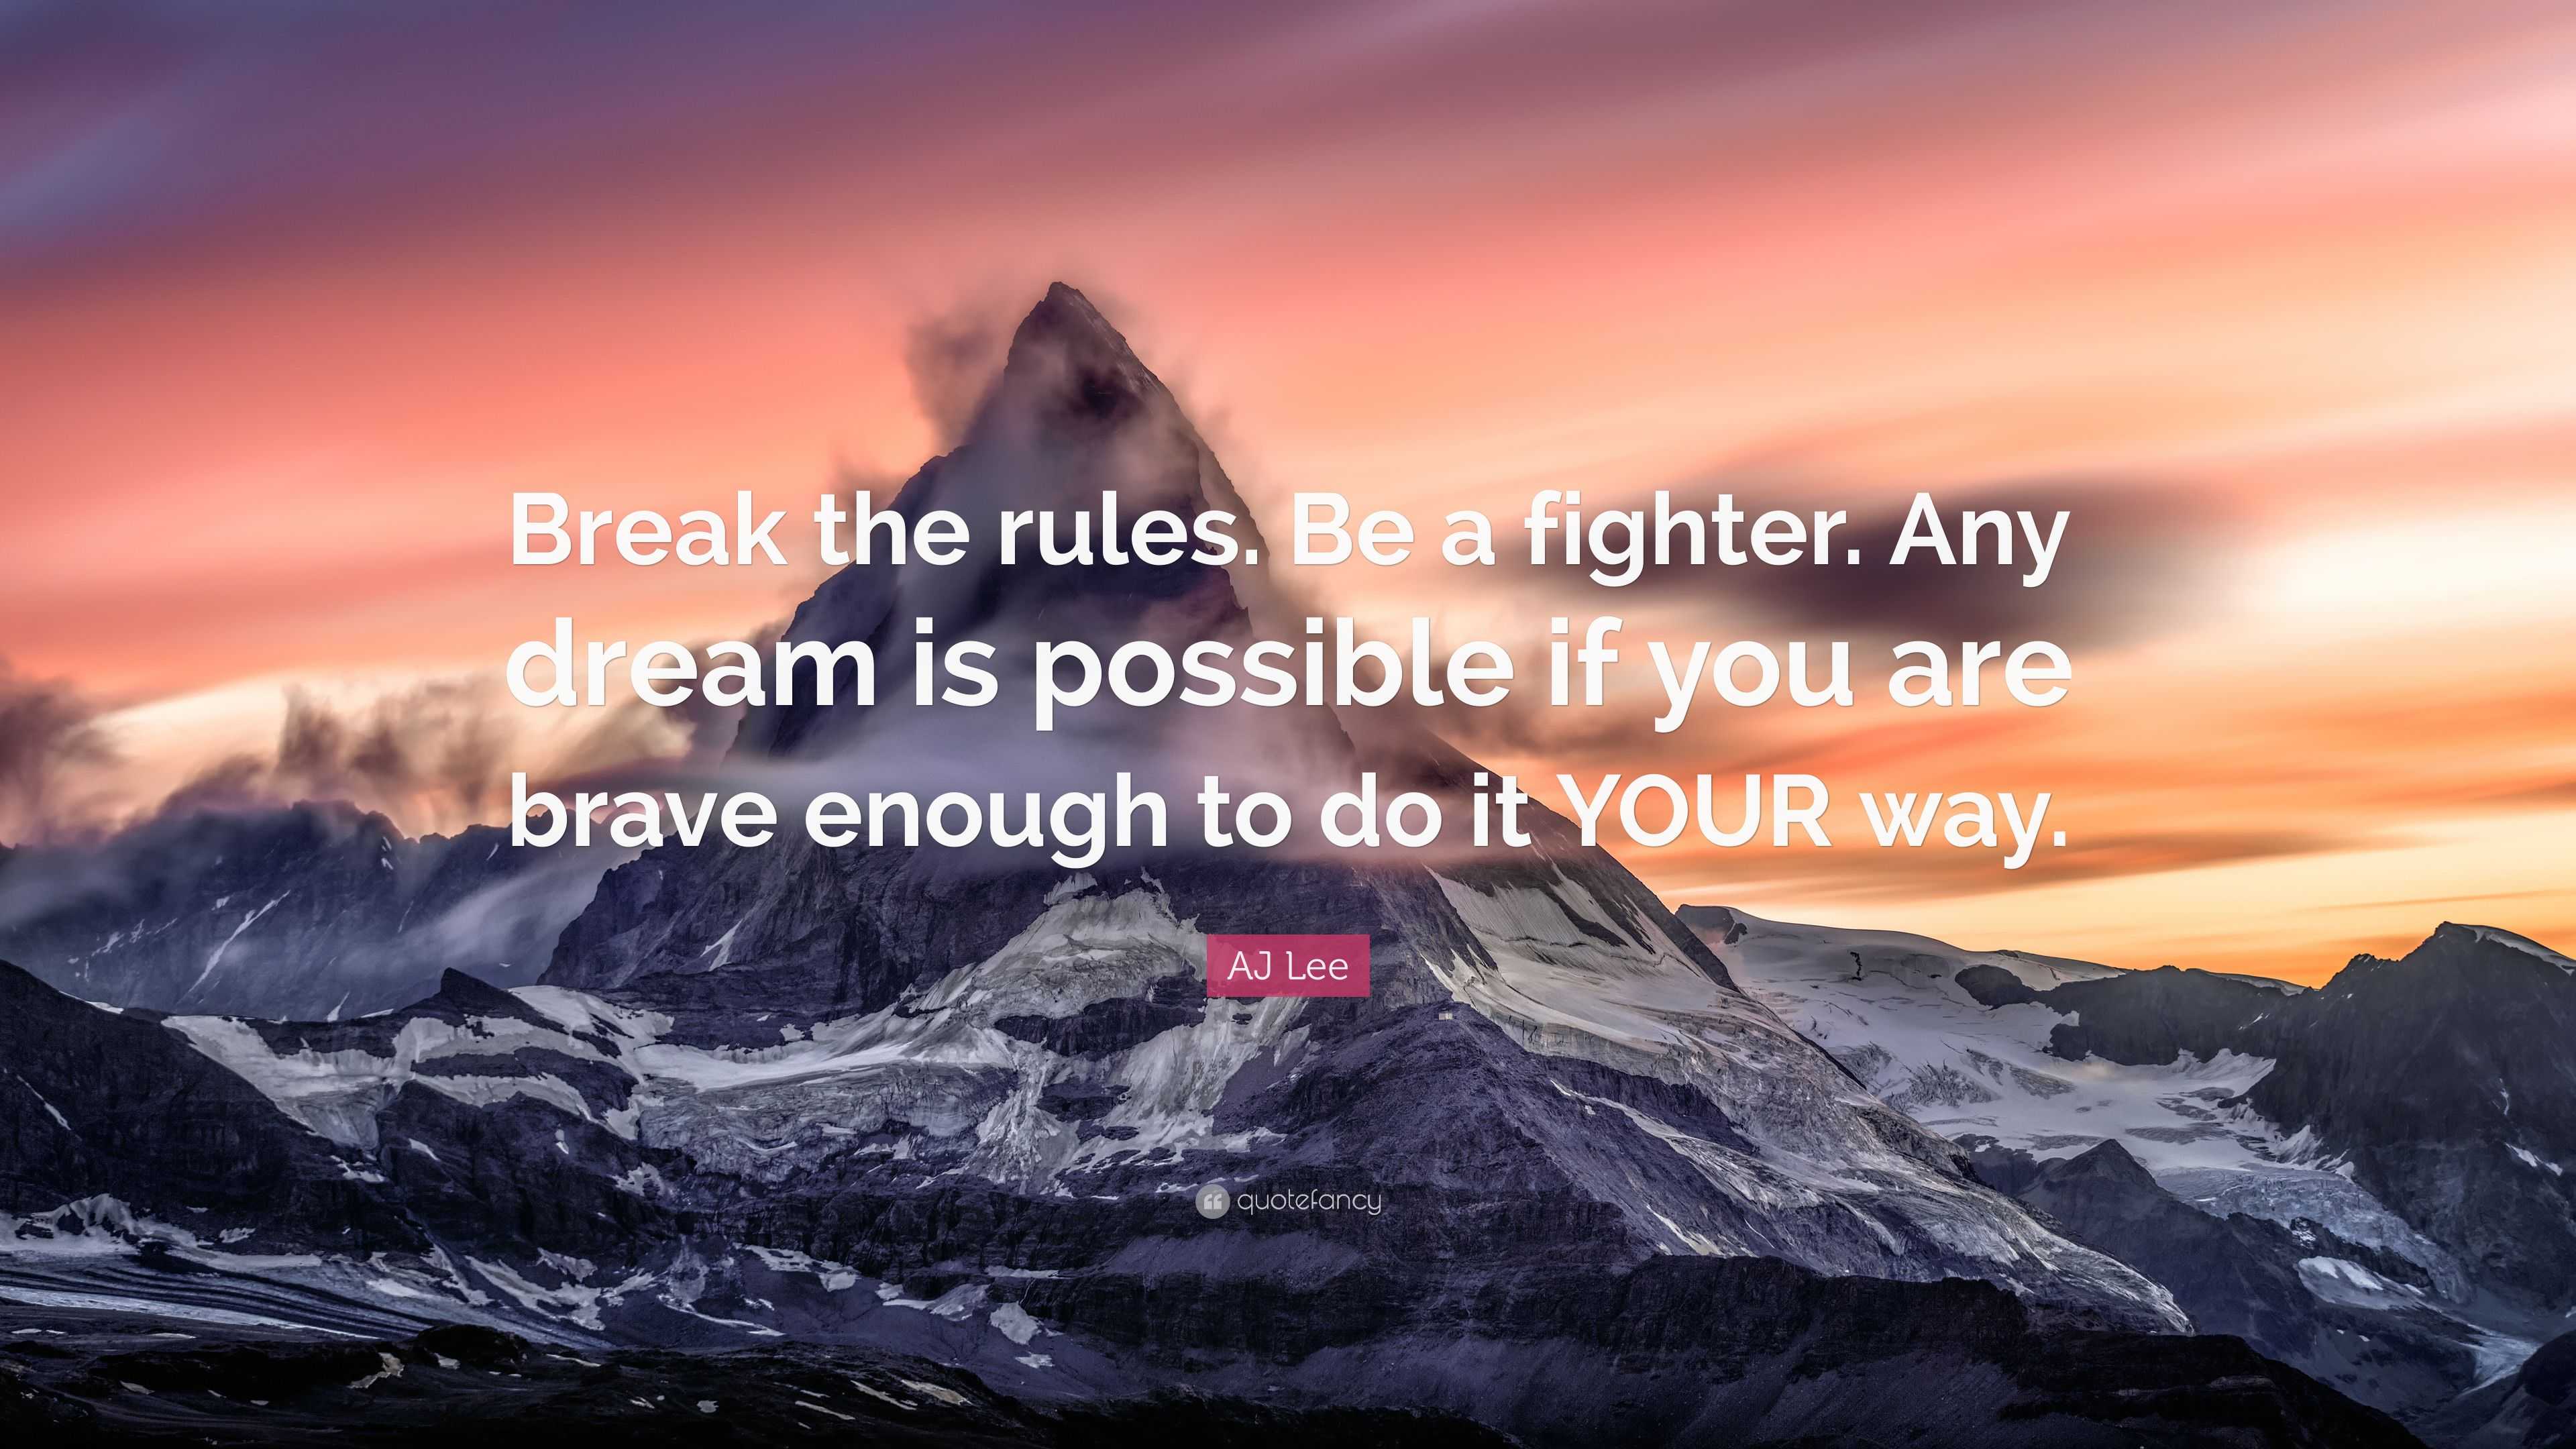 AJ Lee Quote: "Break the rules. Be a fighter. Any dream is possible if you are brave enough to ...